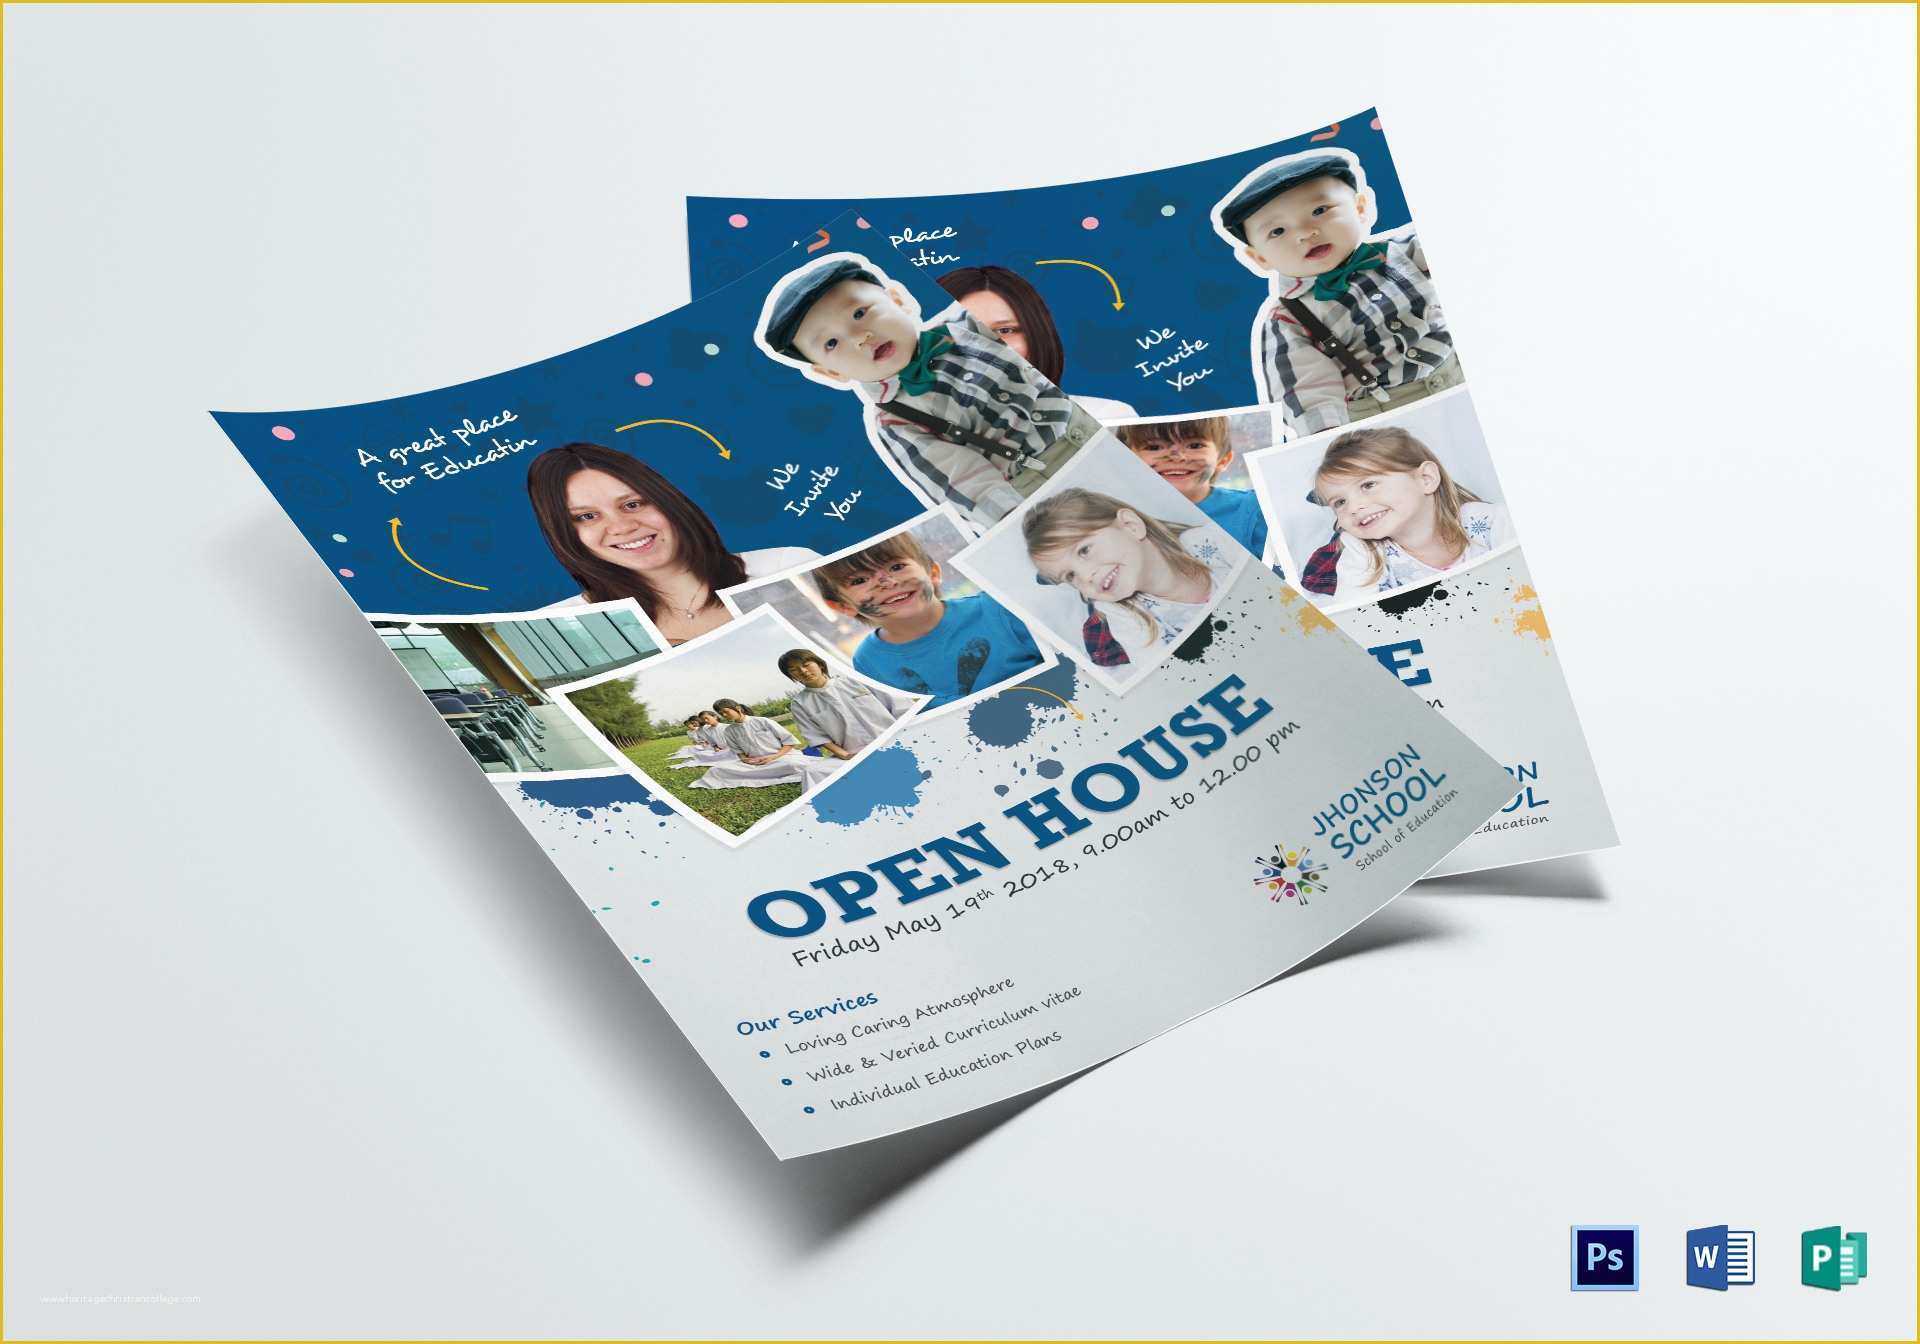 Open House Flyer Template Free Publisher Of Kids Open House Flyer Design Template In Psd Word Publisher